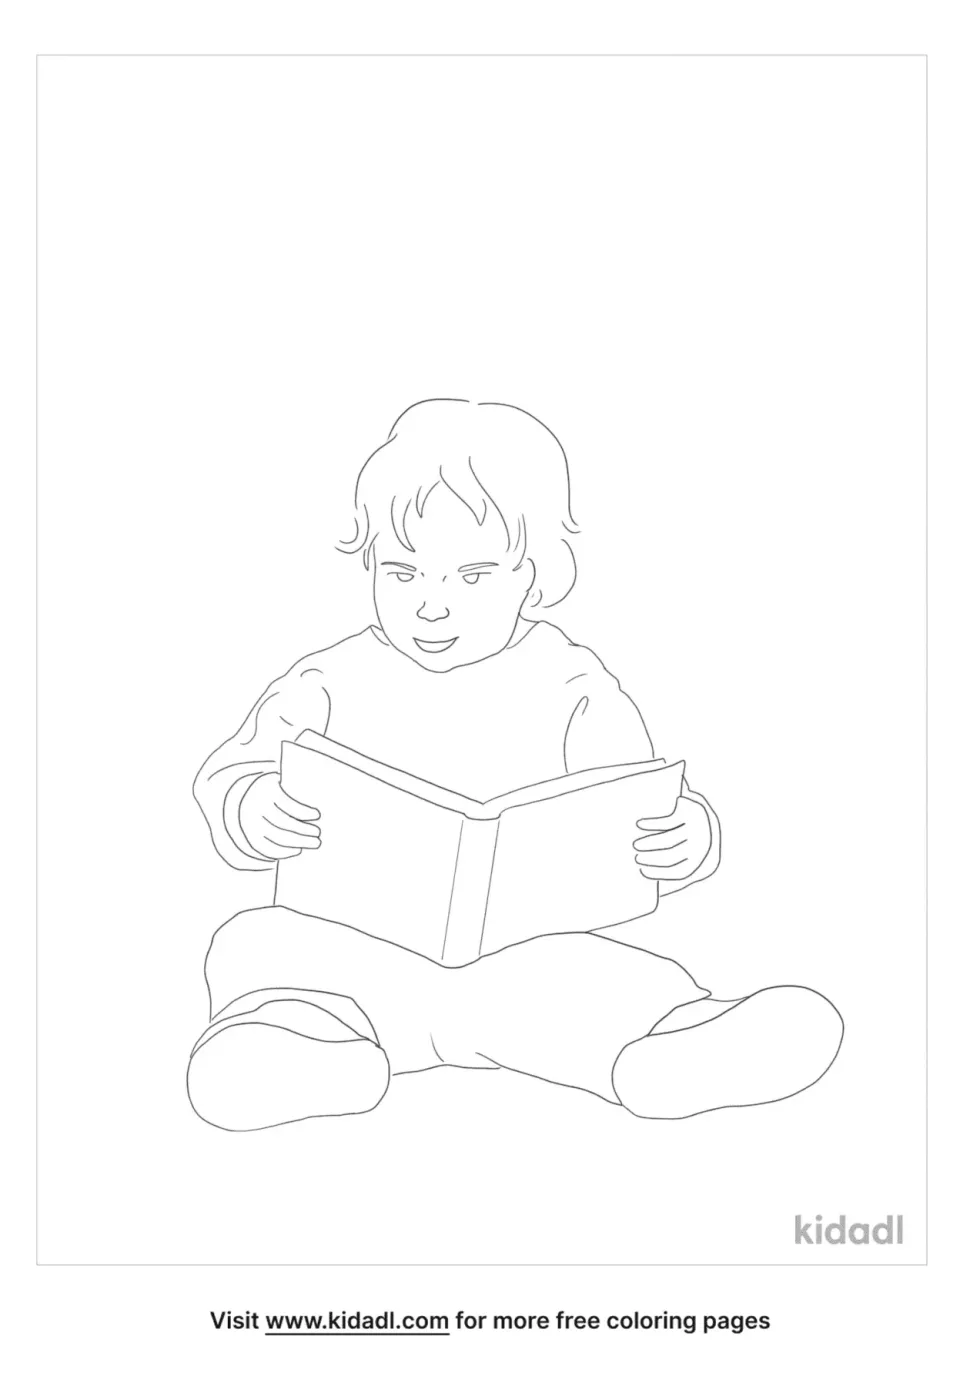 Child Holding Book